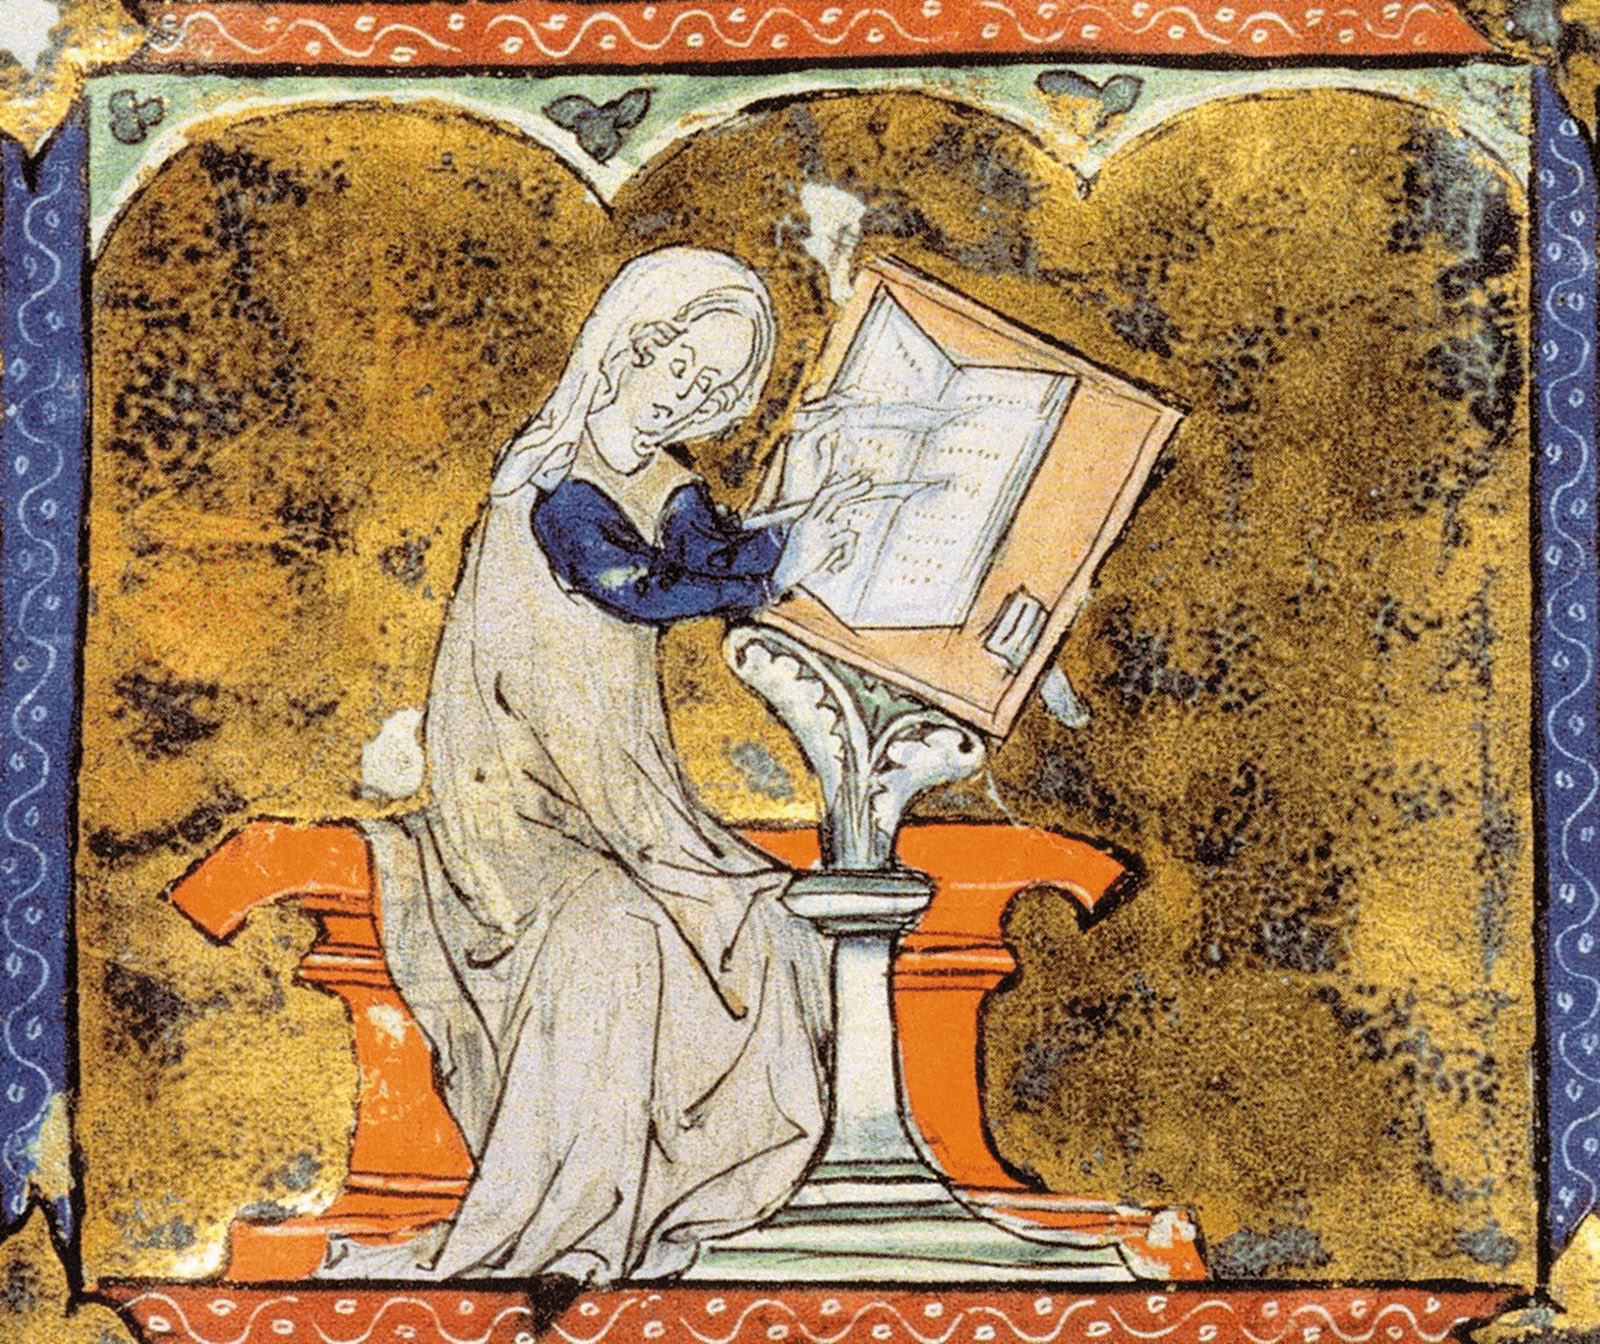 The writer Marie de France, who lived in England in the late twelfth and early thirteenth centuries, pictured in a collection of poems in old French, from an illuminated manuscript